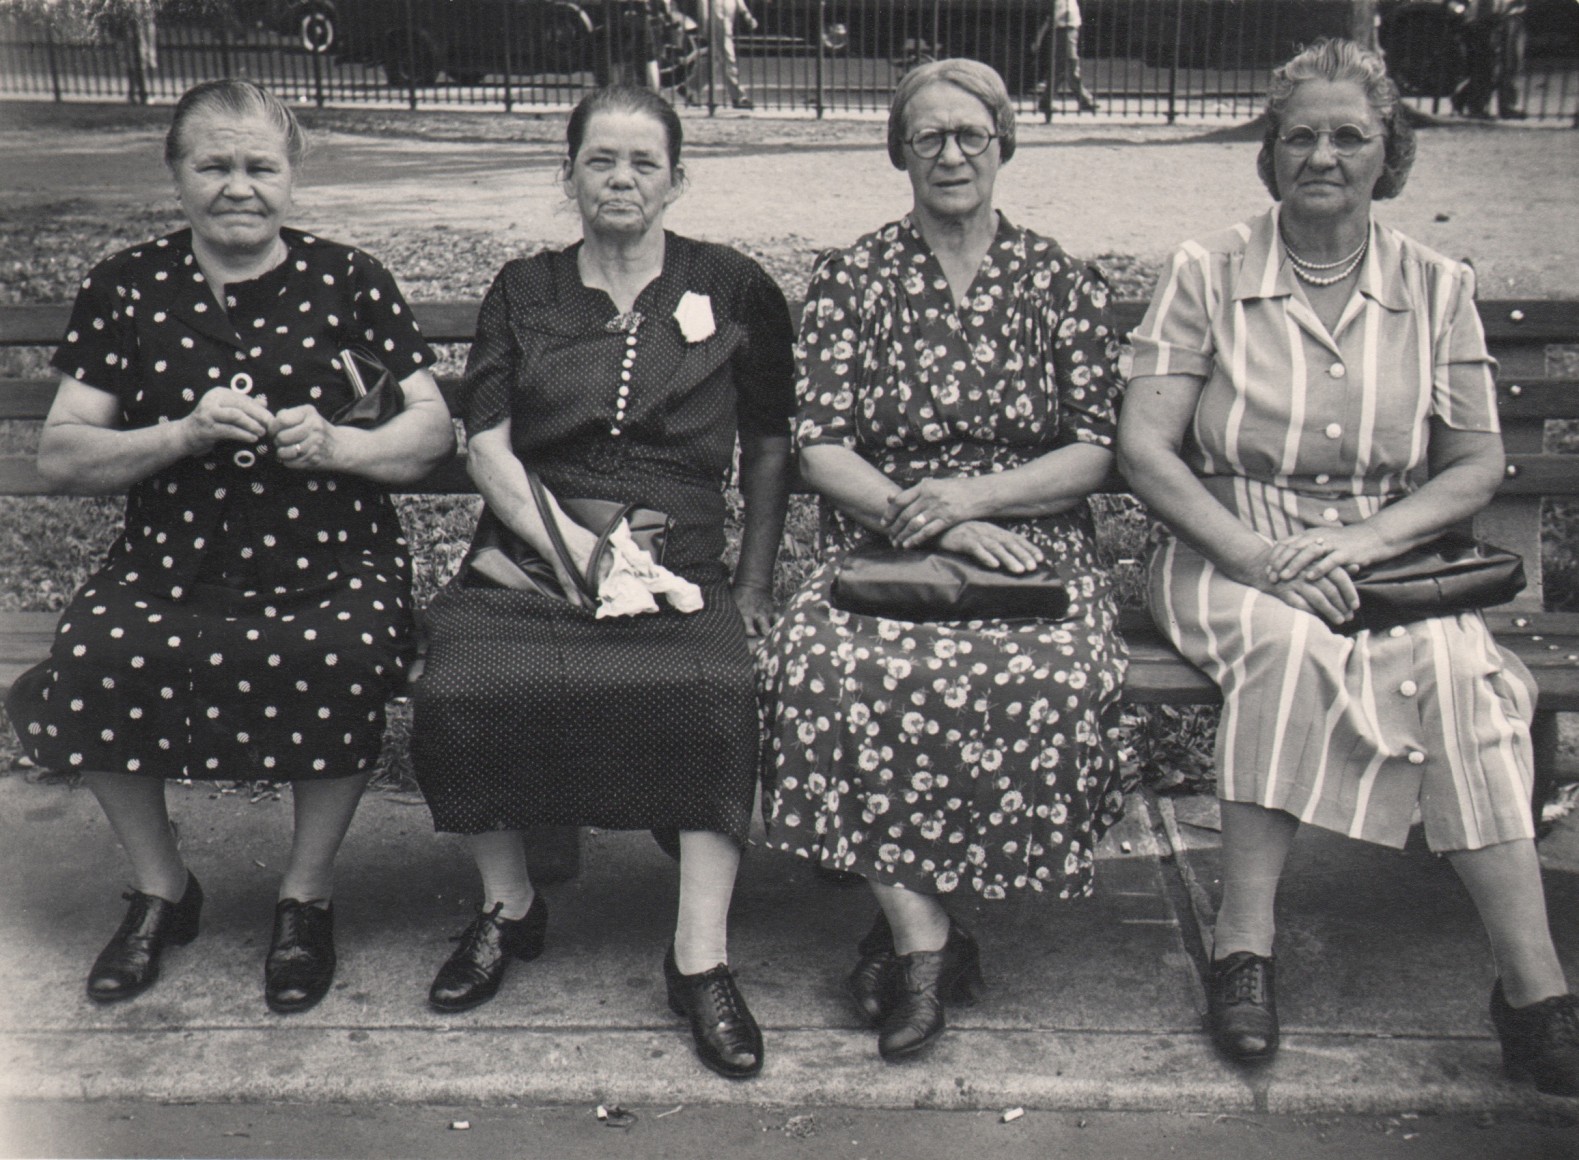 26. Jeanne Ebstel, Untitled, c. 1945. Four middle aged women sitting on a park bench, looking to the camera.